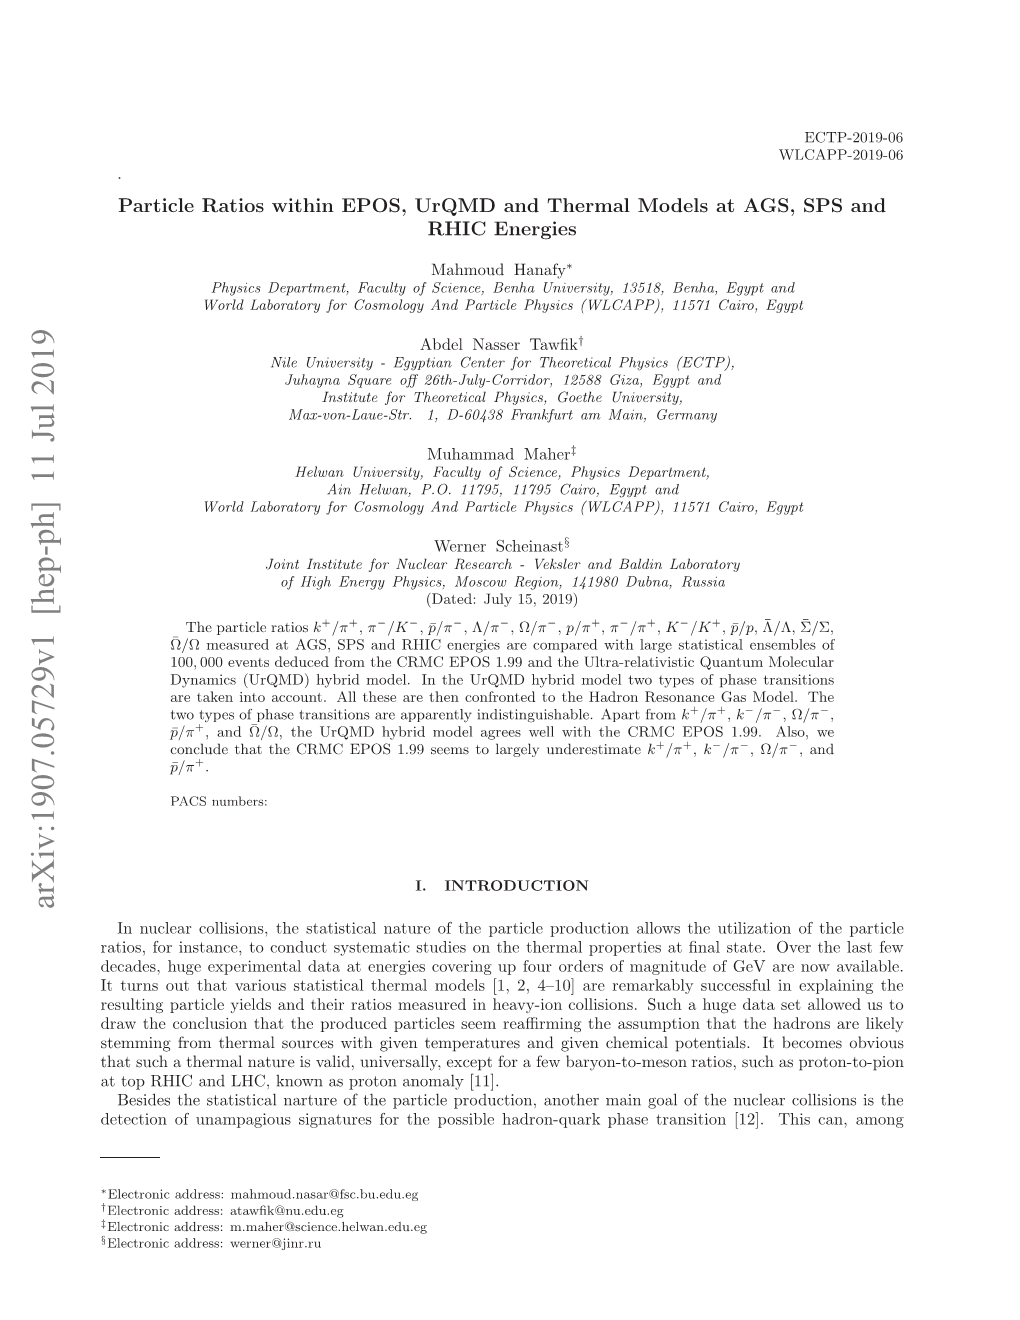 Particle Ratios Within EPOS, Urqmd and Thermal Models at AGS, SPS and RHIC Energies